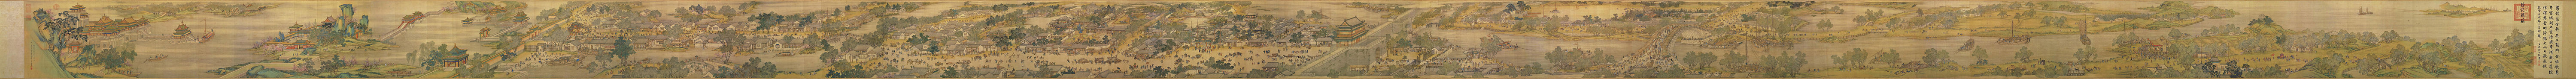 Panorama of Along the River During Ching Ming Festival, 18th century remake of a 12th century original by Chinese artist Zhang Zeduan